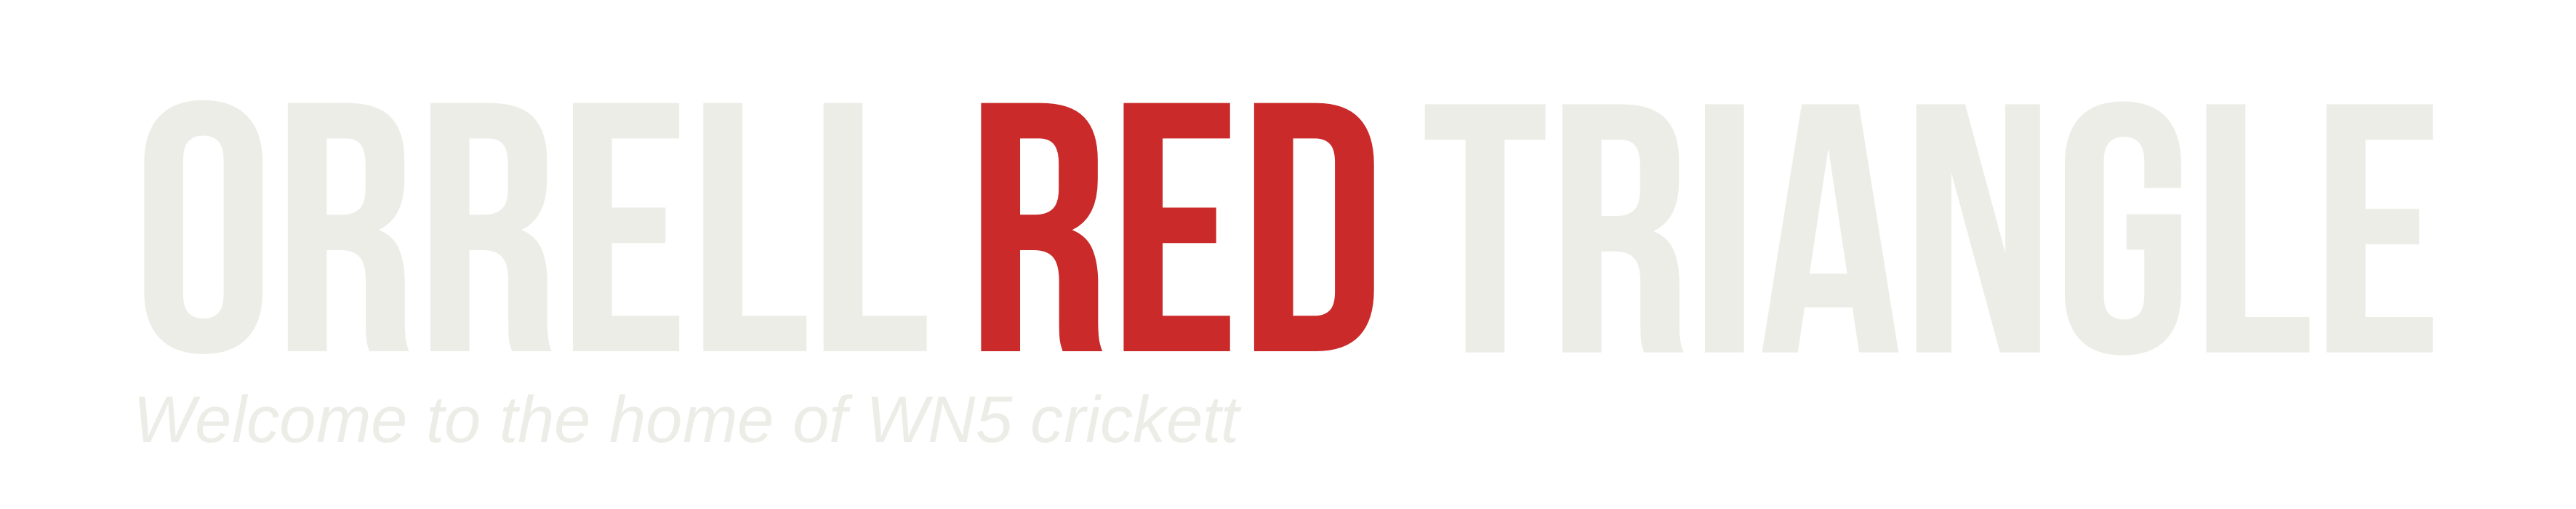 Orrell Red Triangle Cricket Club